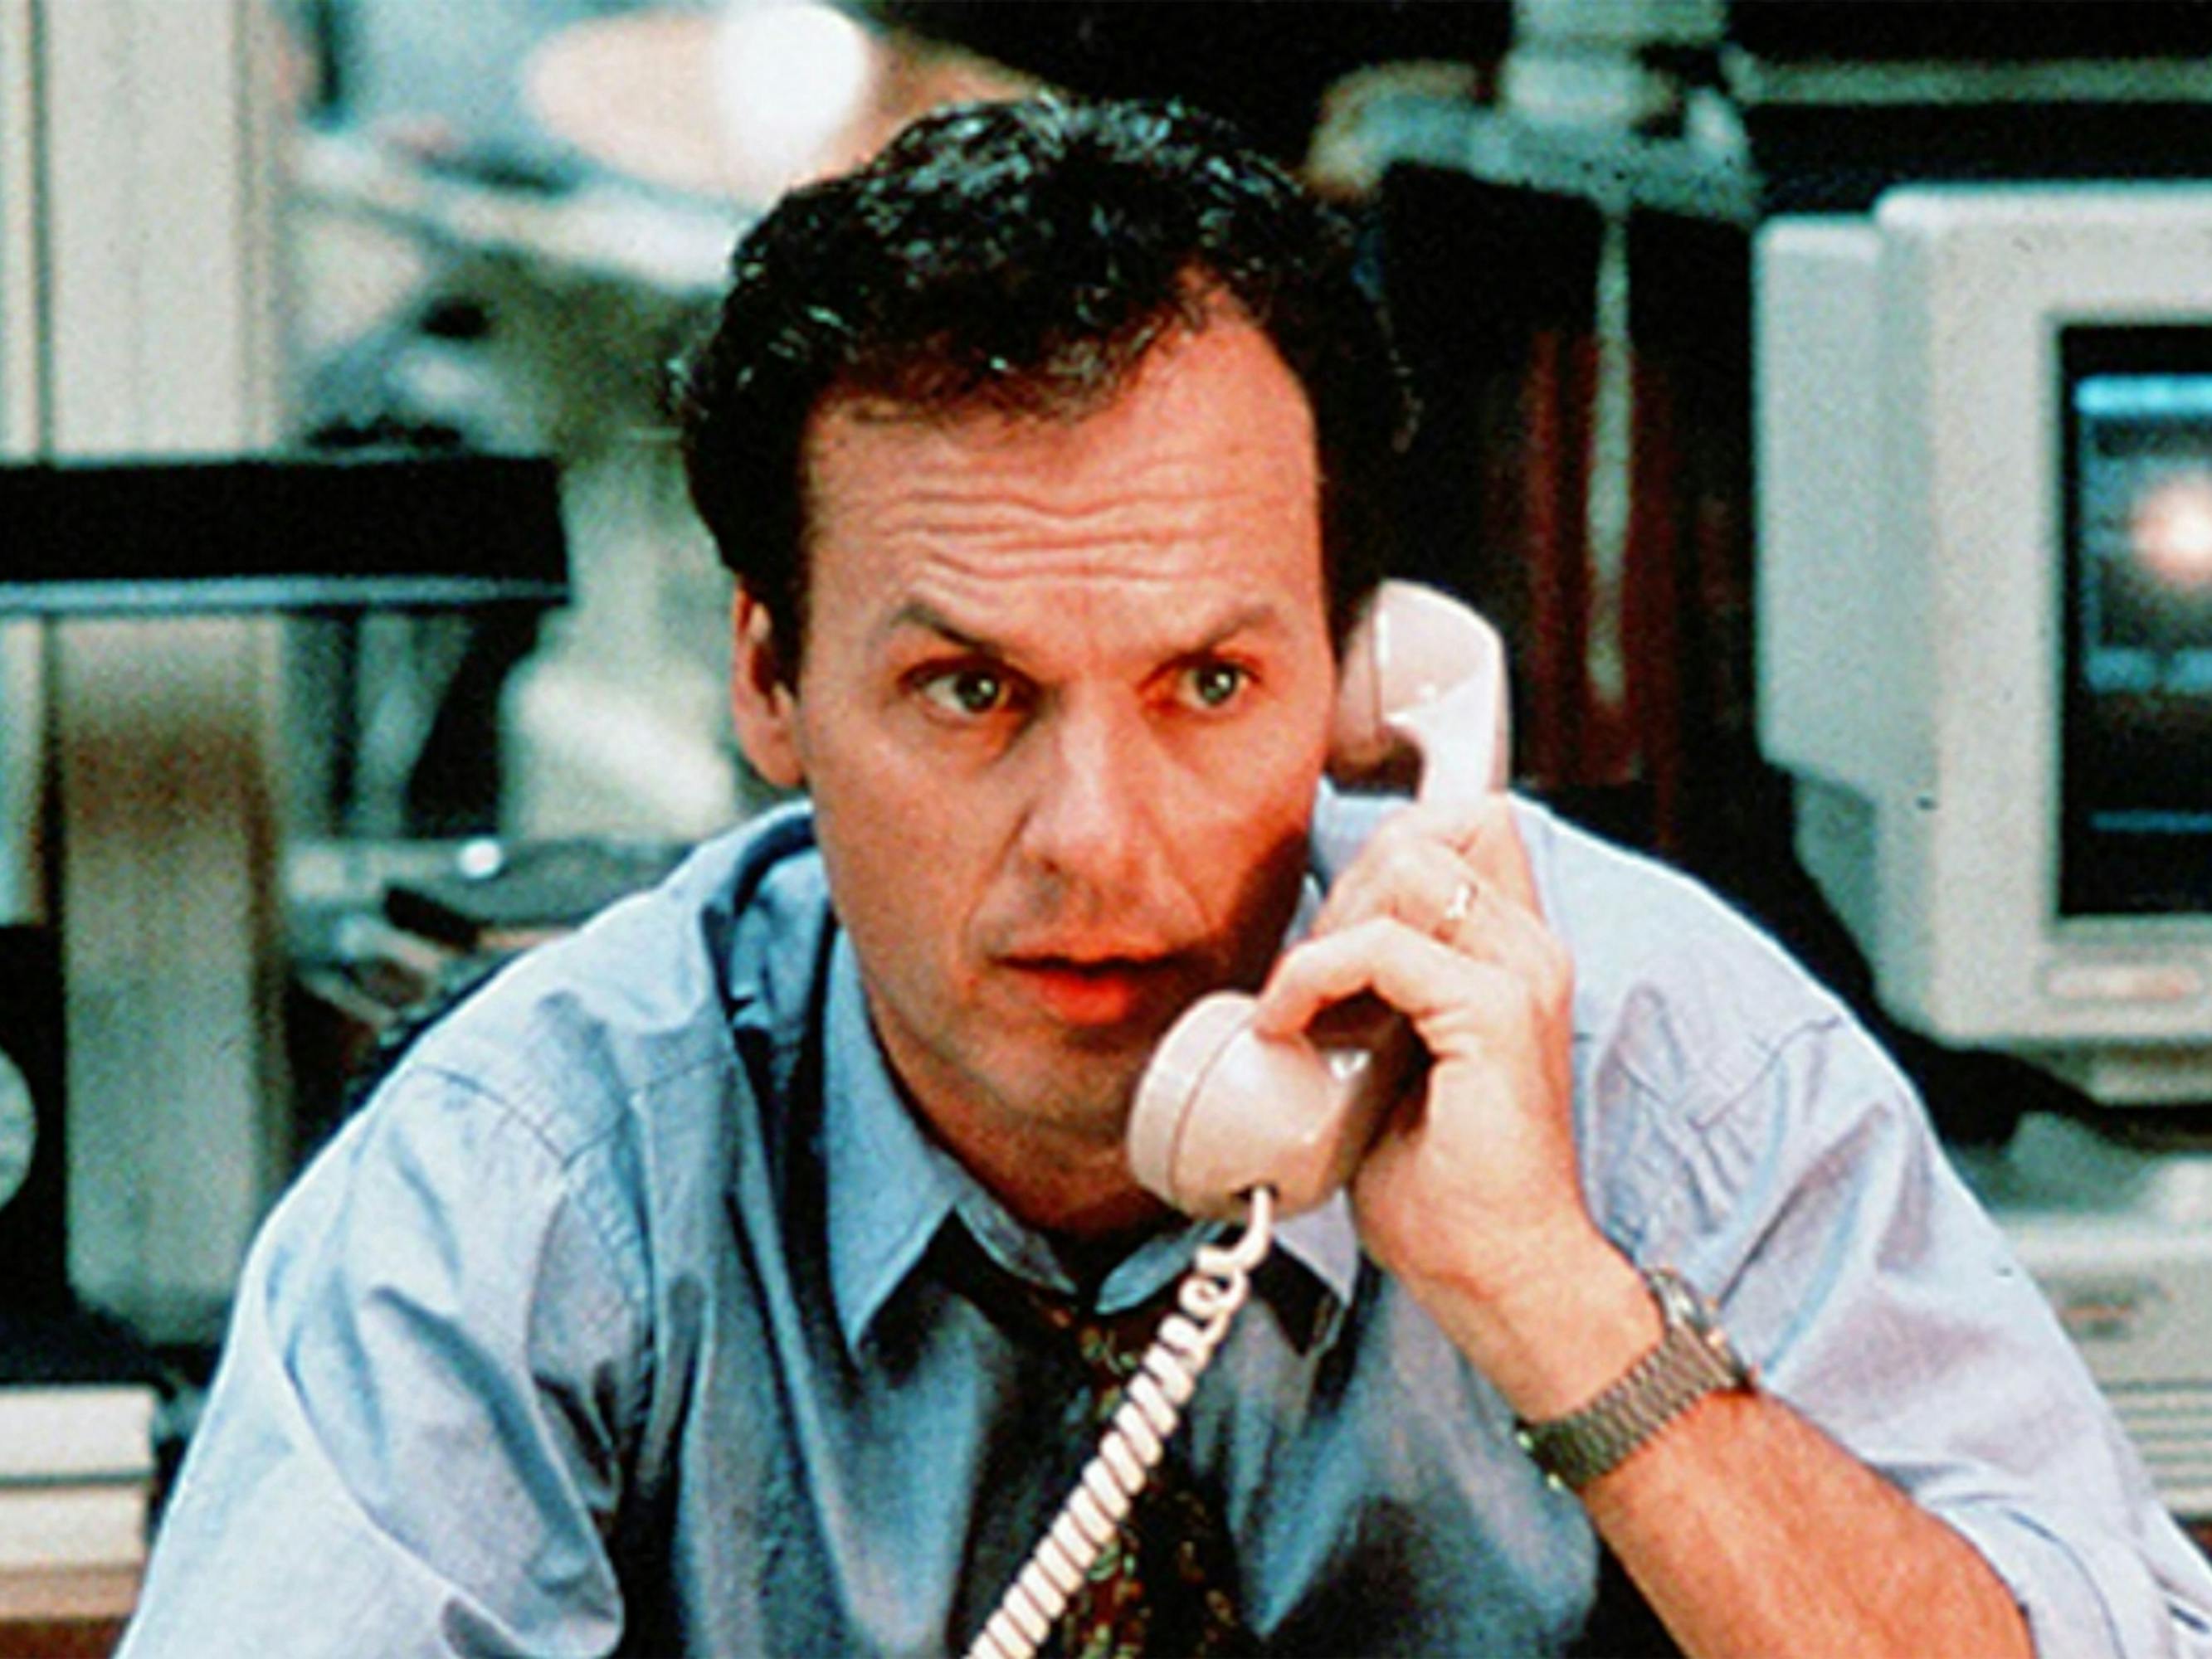 Henry Hackett (Michael Keaton) wears a blue shirt and talks on a phone with an alarmed look.